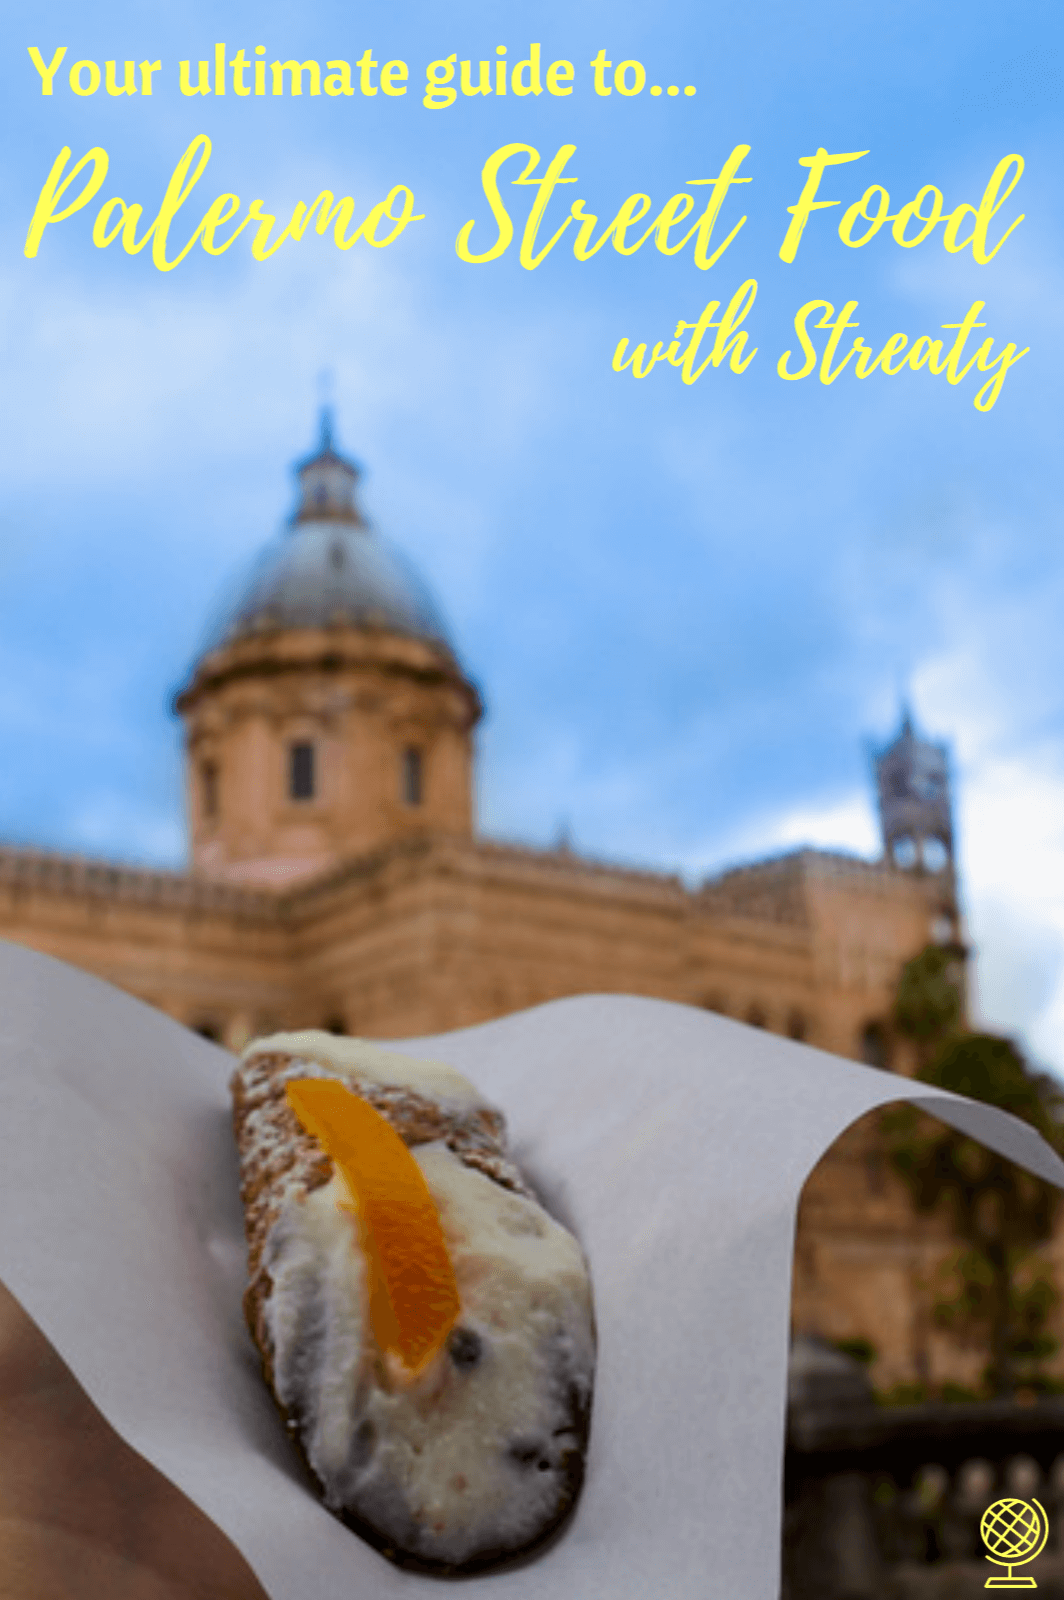 Review of Streaty food tour in Palermo, Sicily